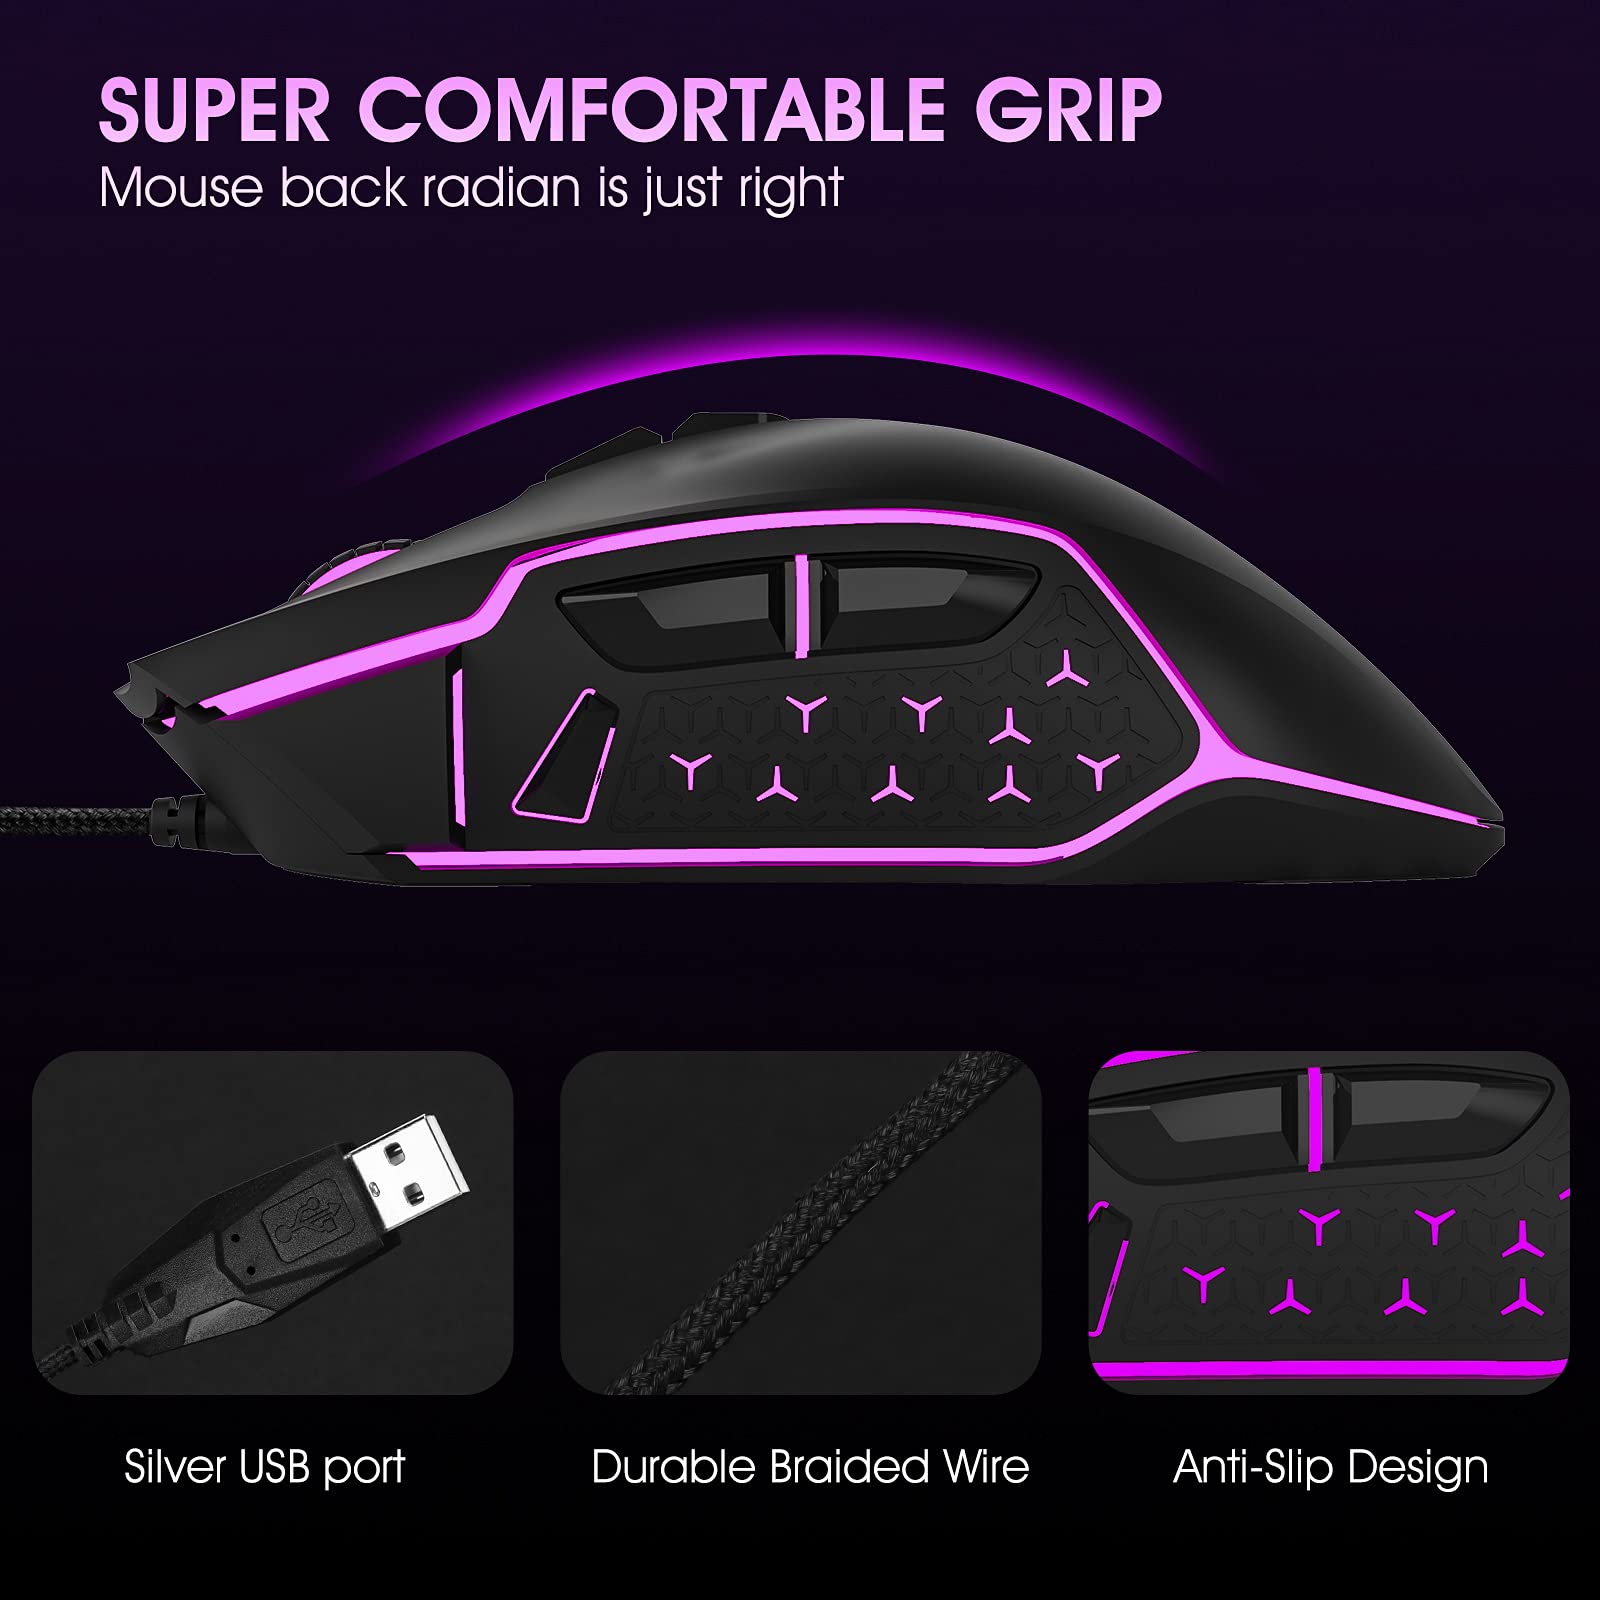 LeadsaiL Gaming Mouse Wired RGB PC Gaming Mice,Up to 7200 DPI, 8 Programmable Buttons,6 Color Backlight, Ergonomic Optical Computer Wired Mouse with Fire Button for Desktop PC Laptop Gamer & Work